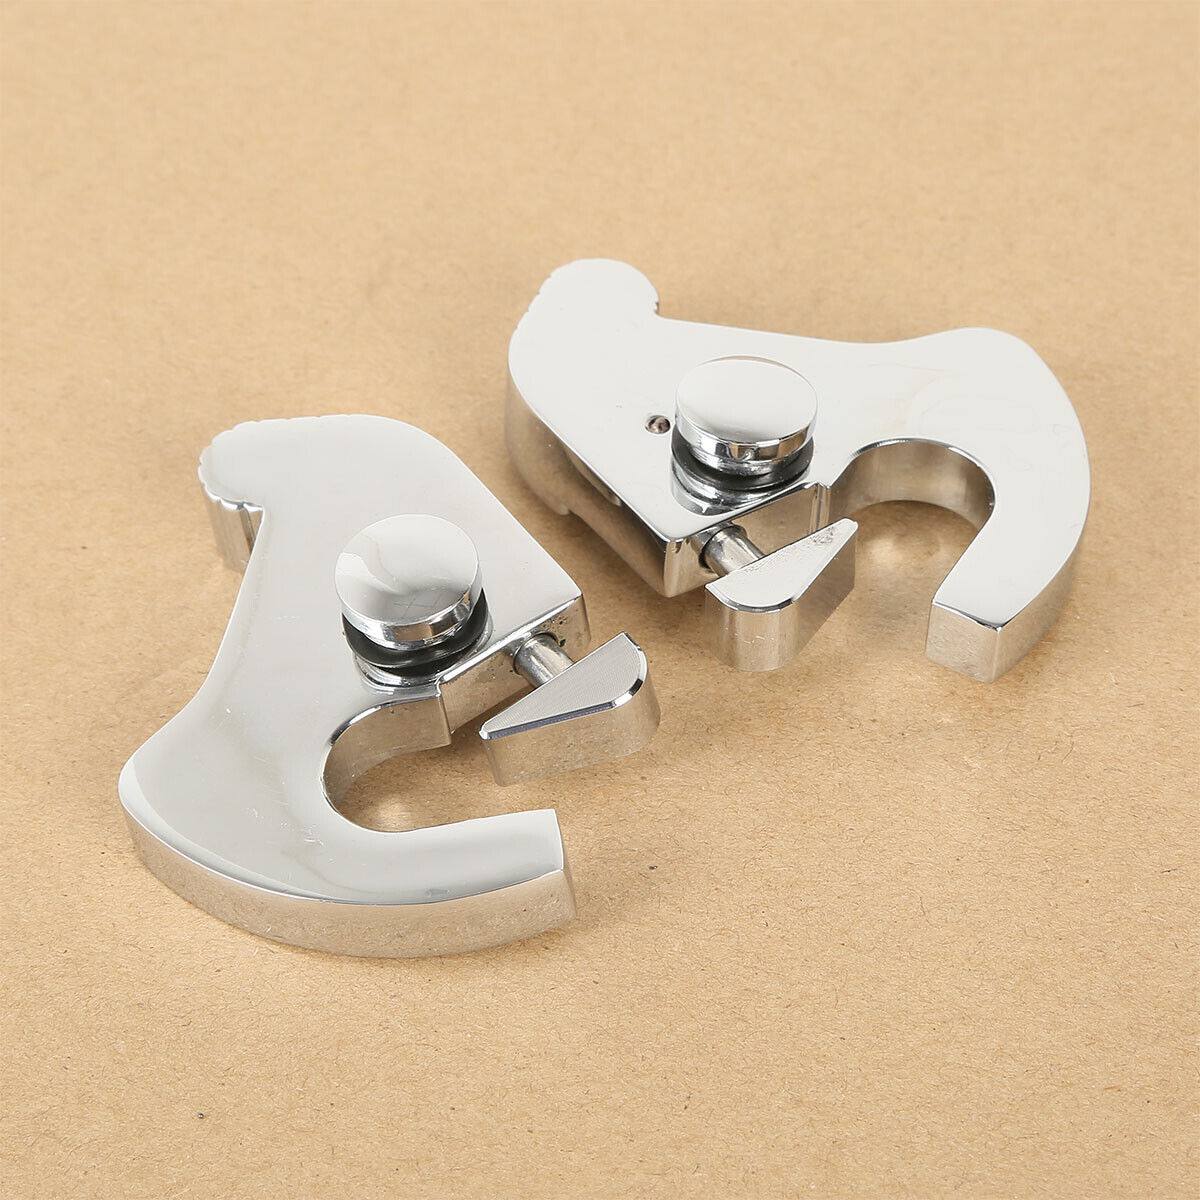 Sissy Bar Luggage Rack Latch Clip Kit Fit For Harley Touring Road King Glide US - Moto Life Products